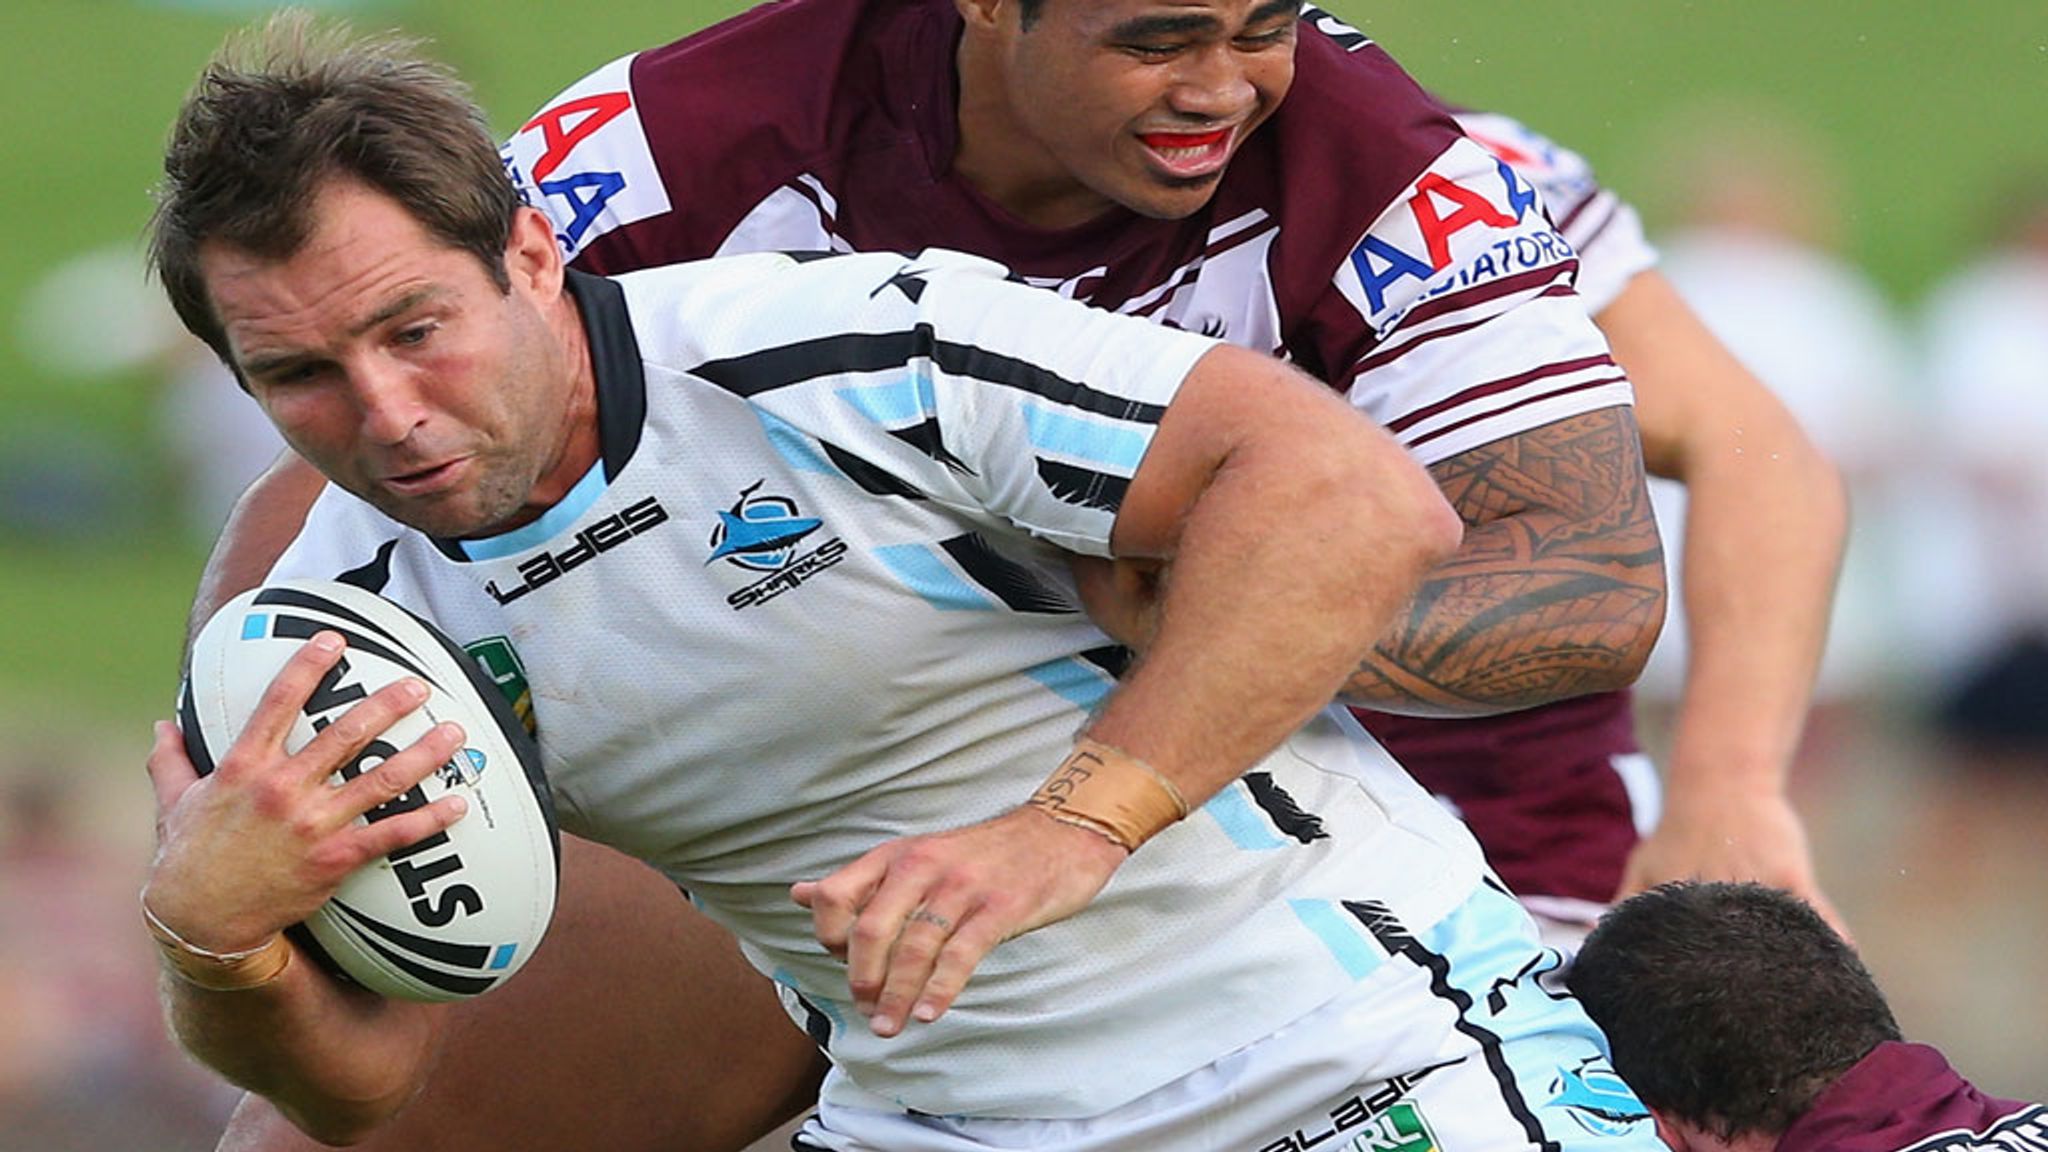 Former rugby league player Ben Ross injured in televised charity arm-wrestle Rugby League News Sky Sports